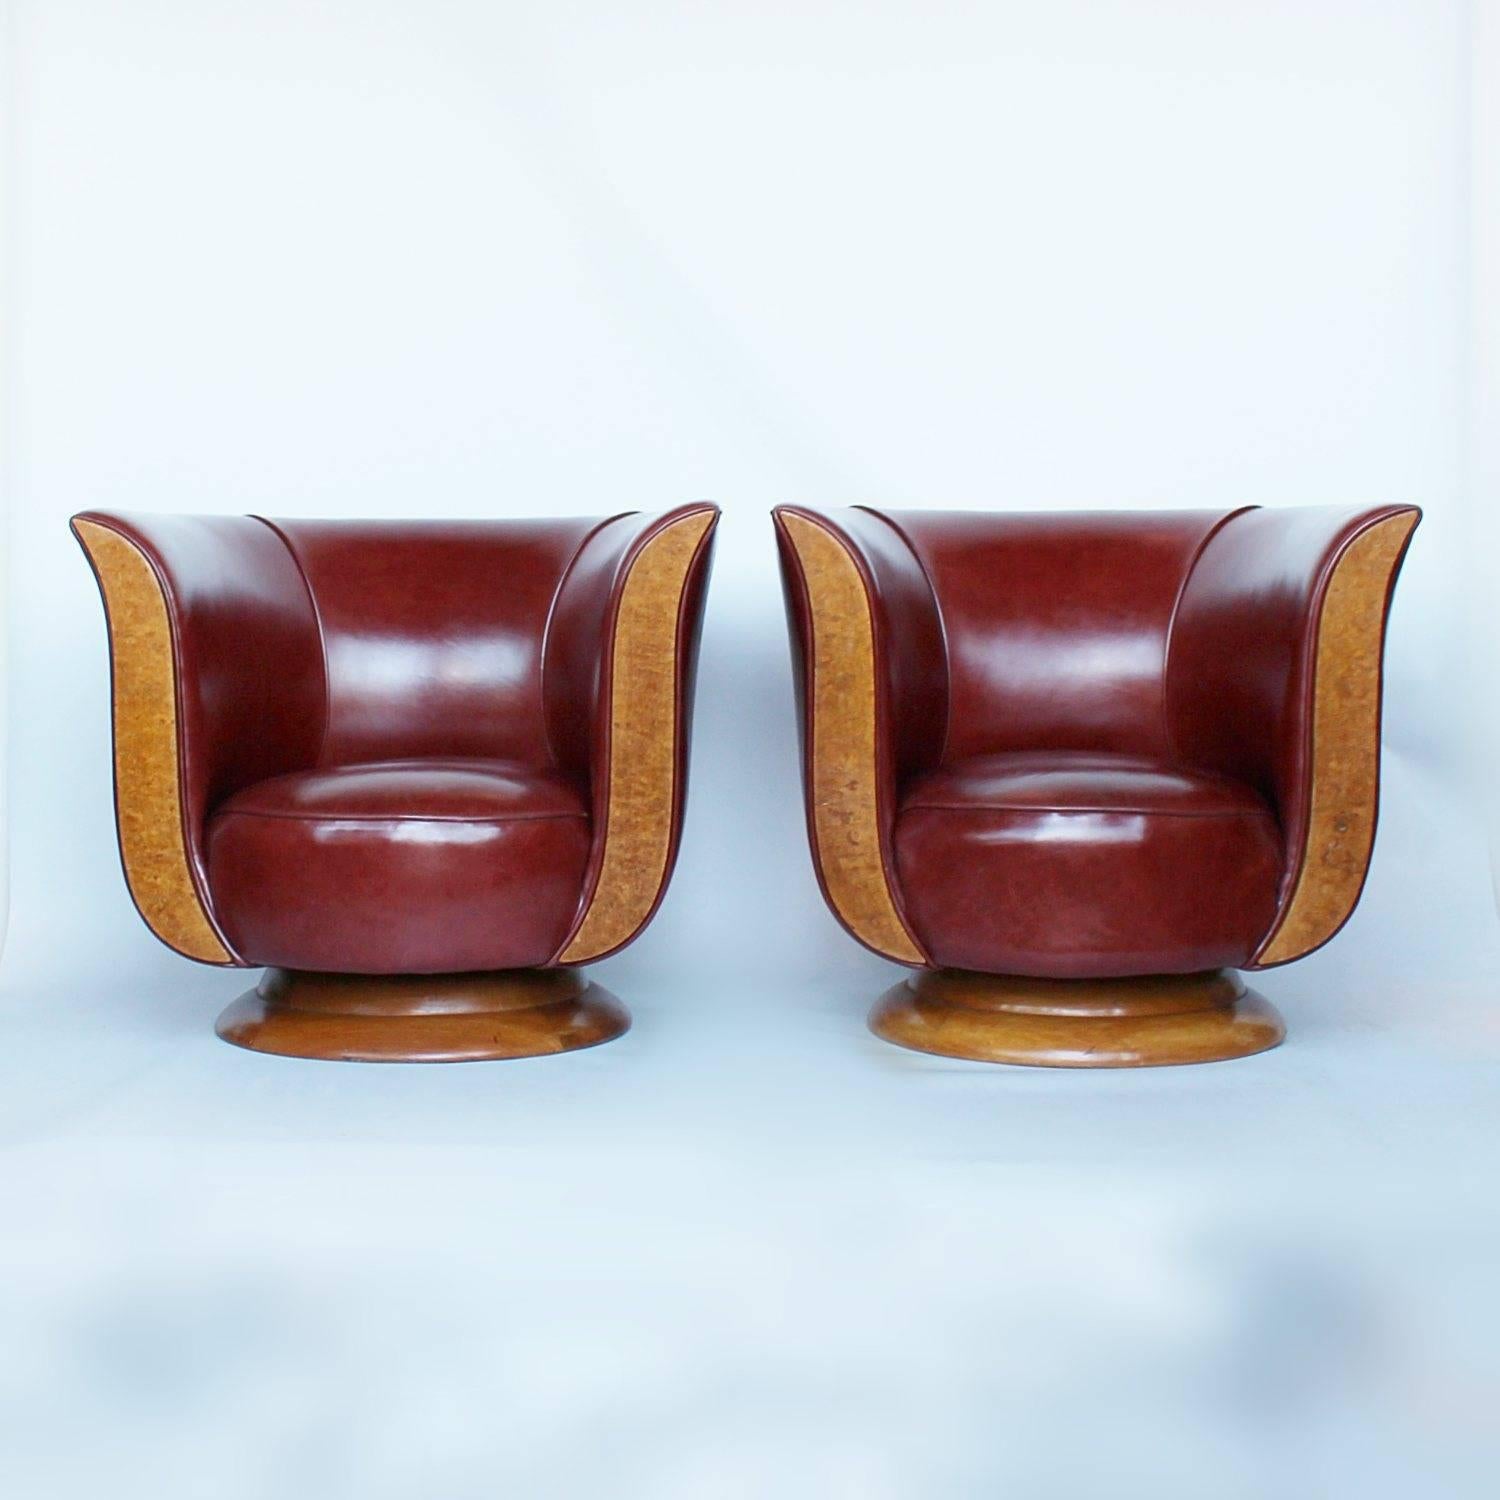 A Pair of Art Deco Tulip Chairs 2